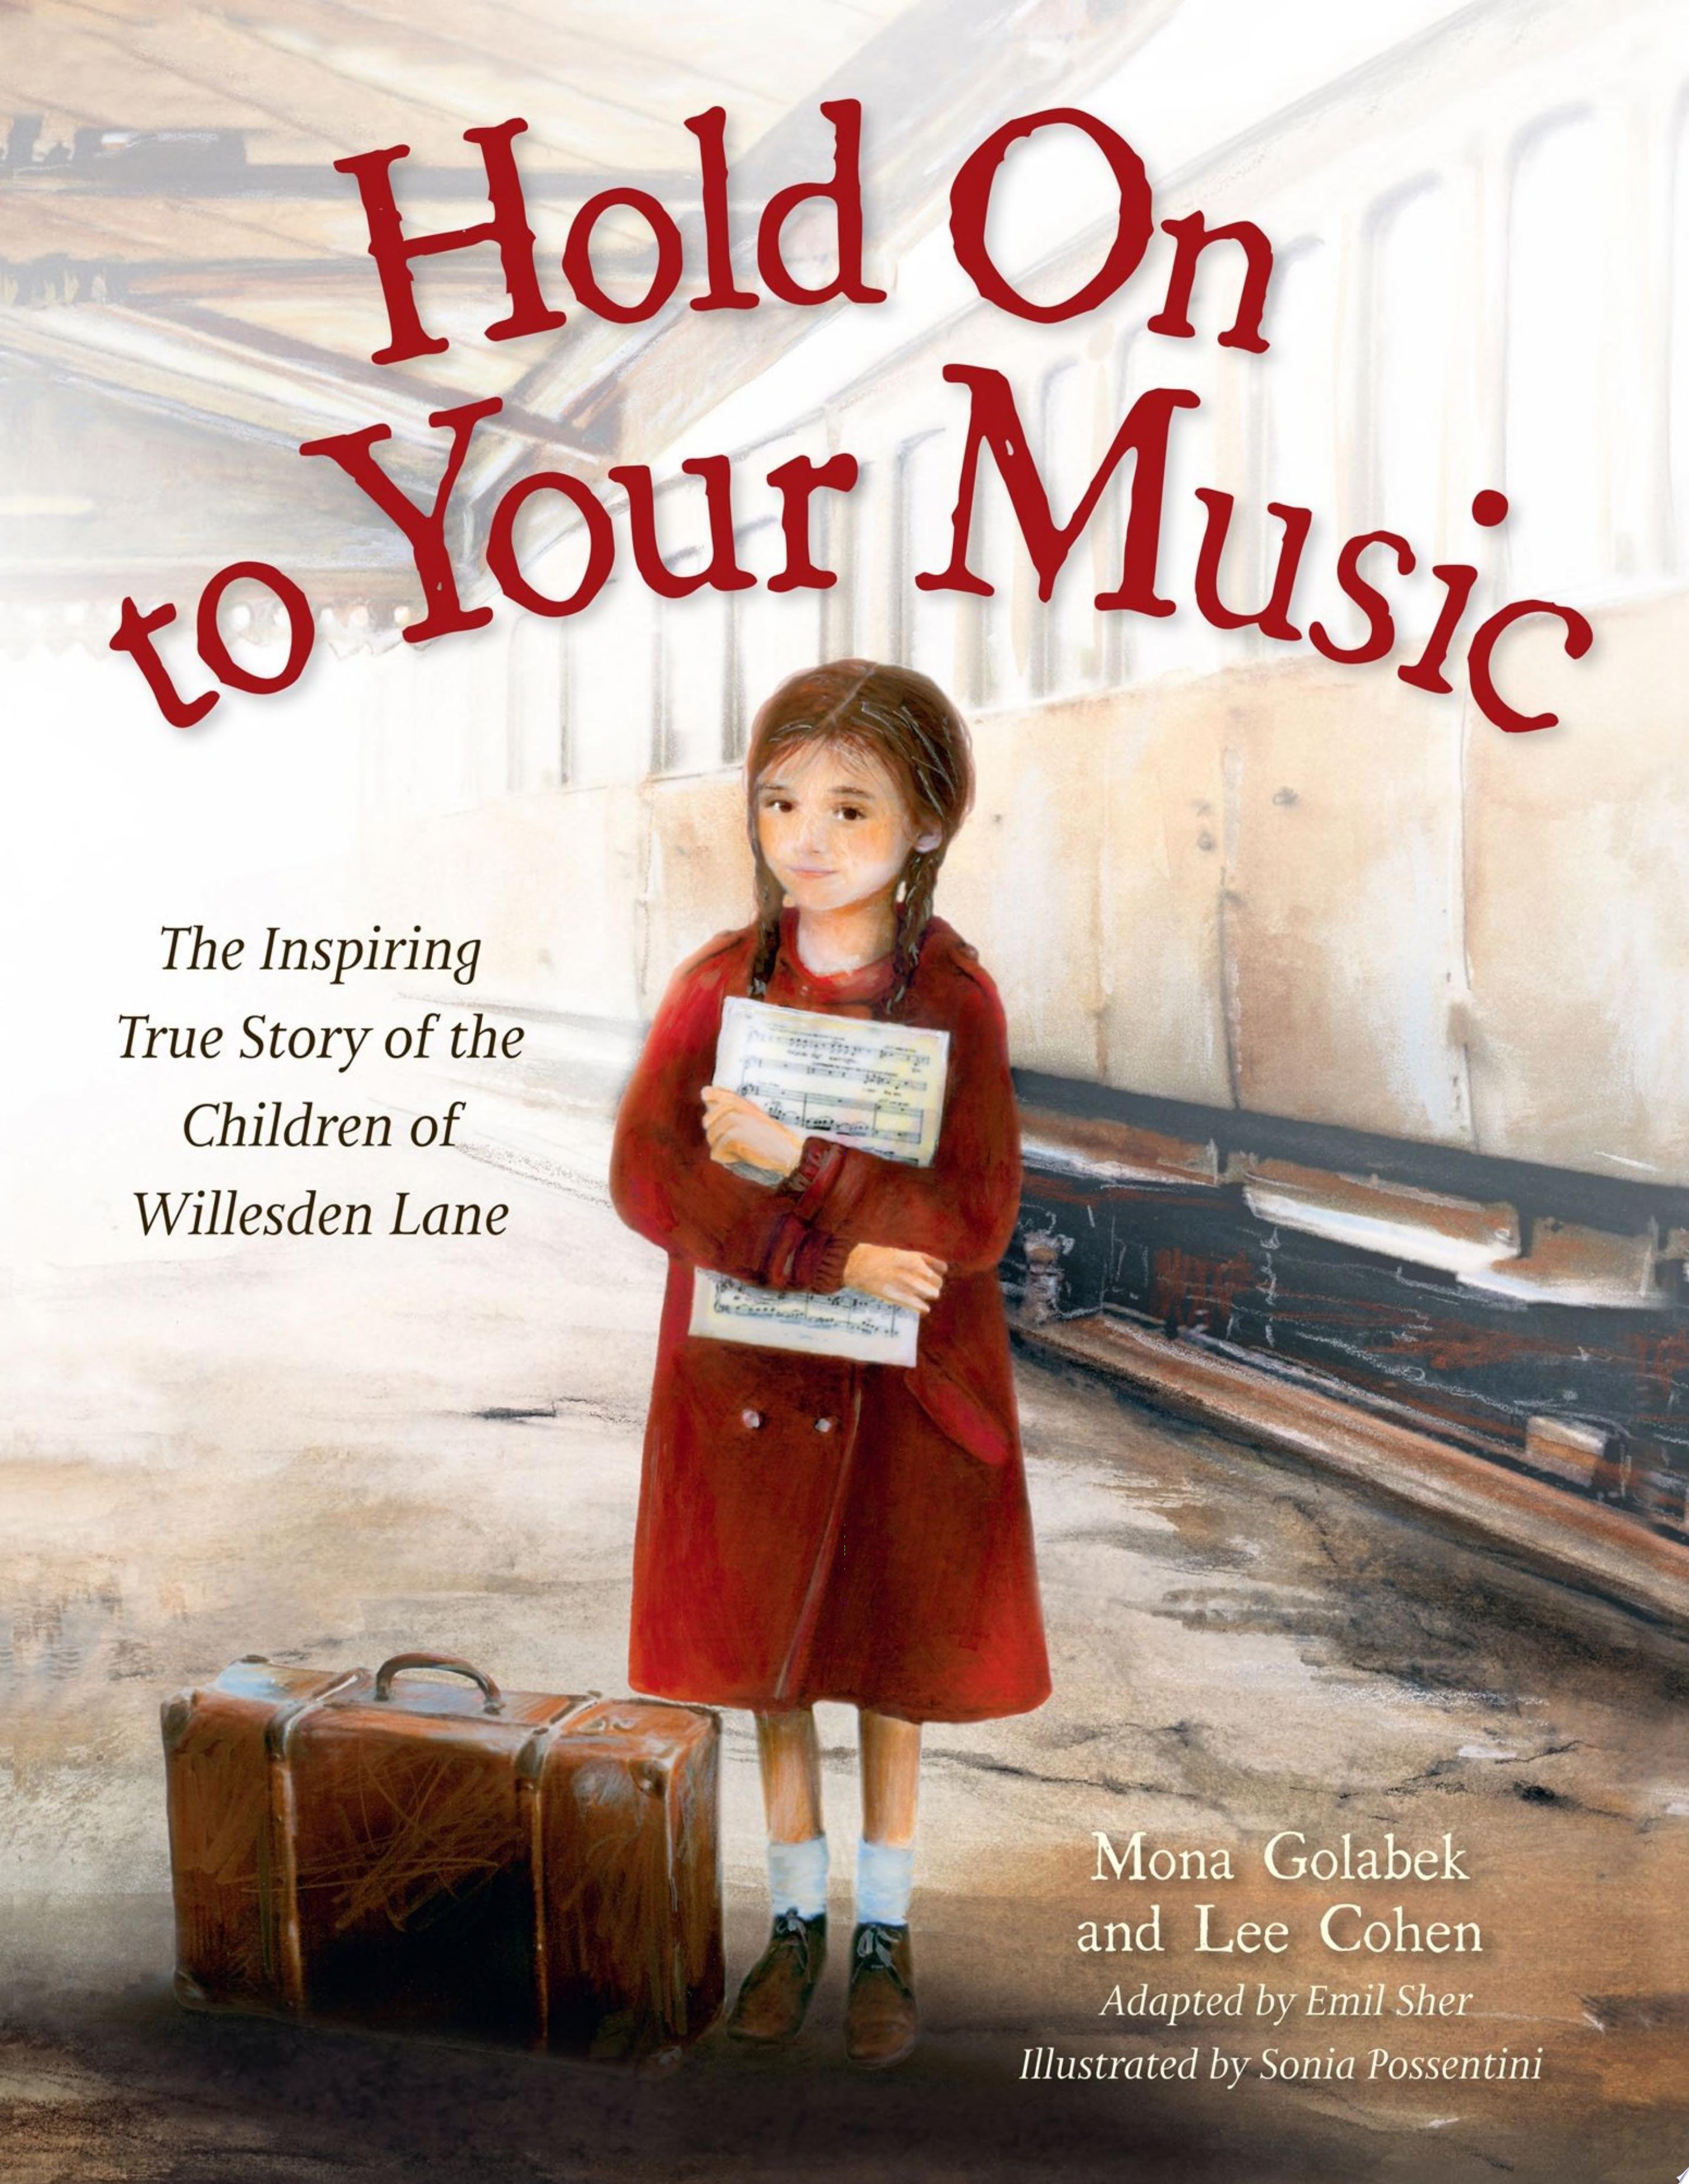 Image for "Hold On to Your Music"